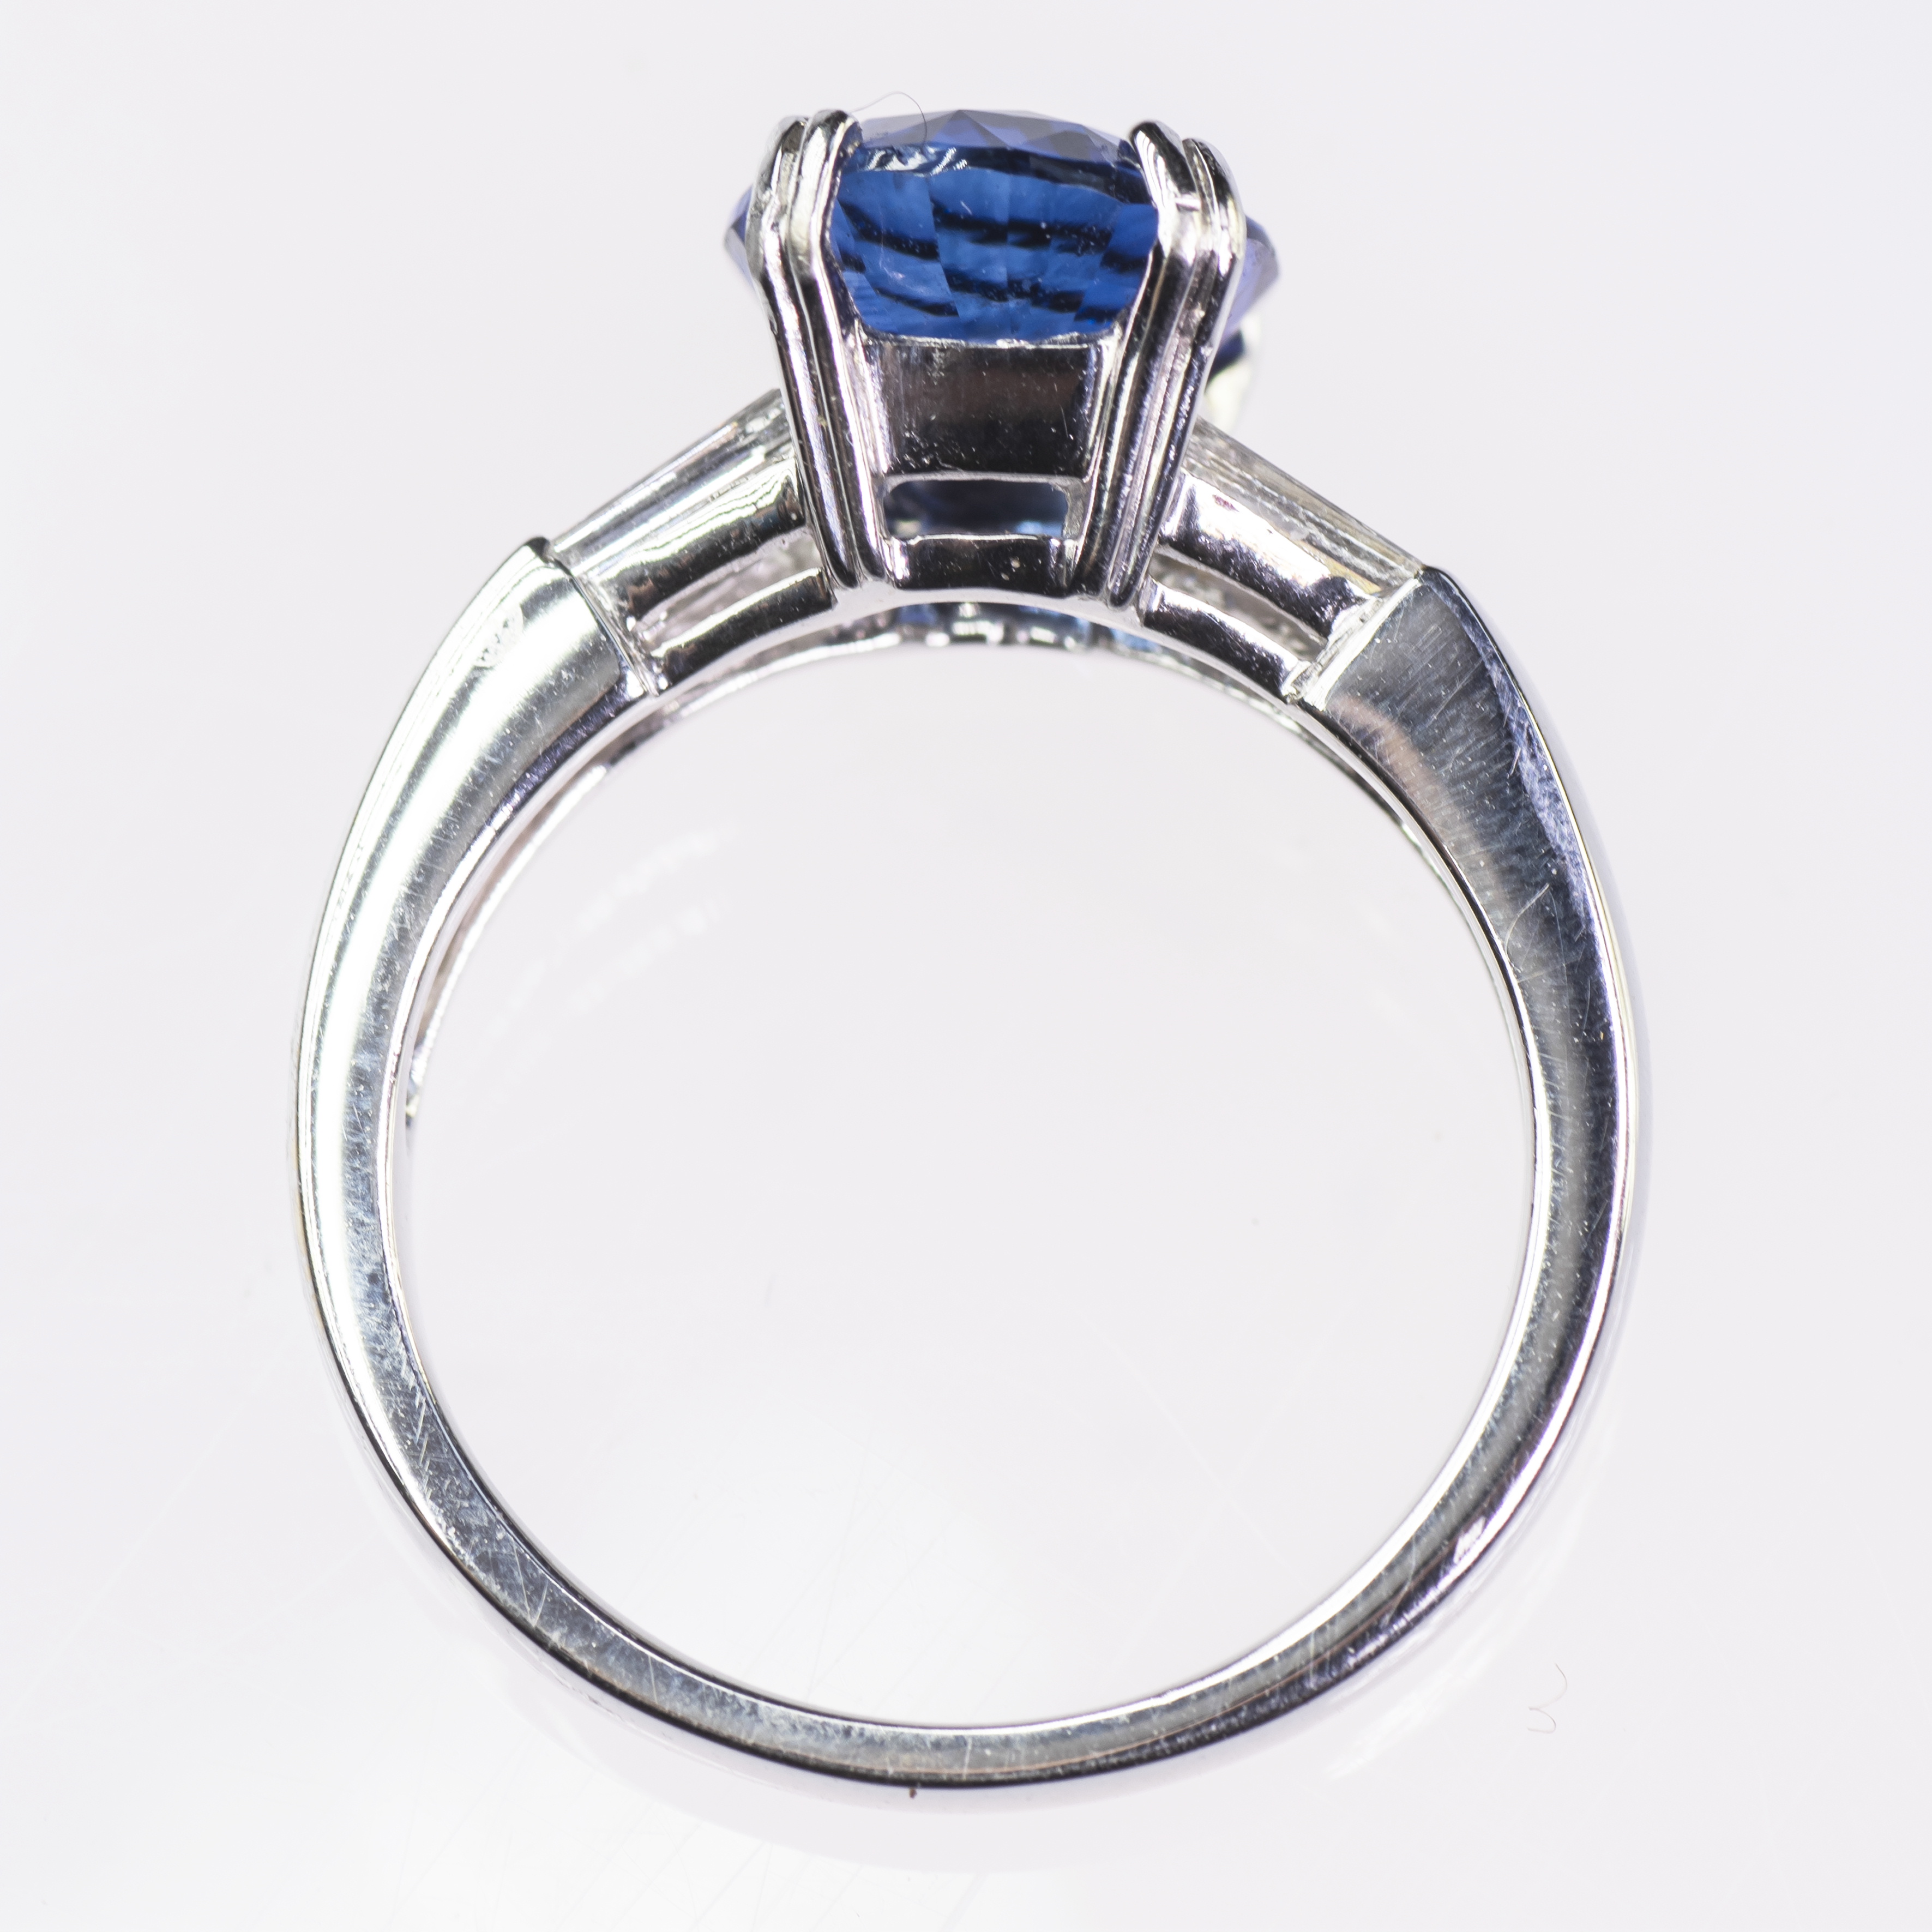 AN OVAL CUT FOUR CARAT SAPPHIRE AND BAGUETTE CUT DIAMOND RING - Image 2 of 3